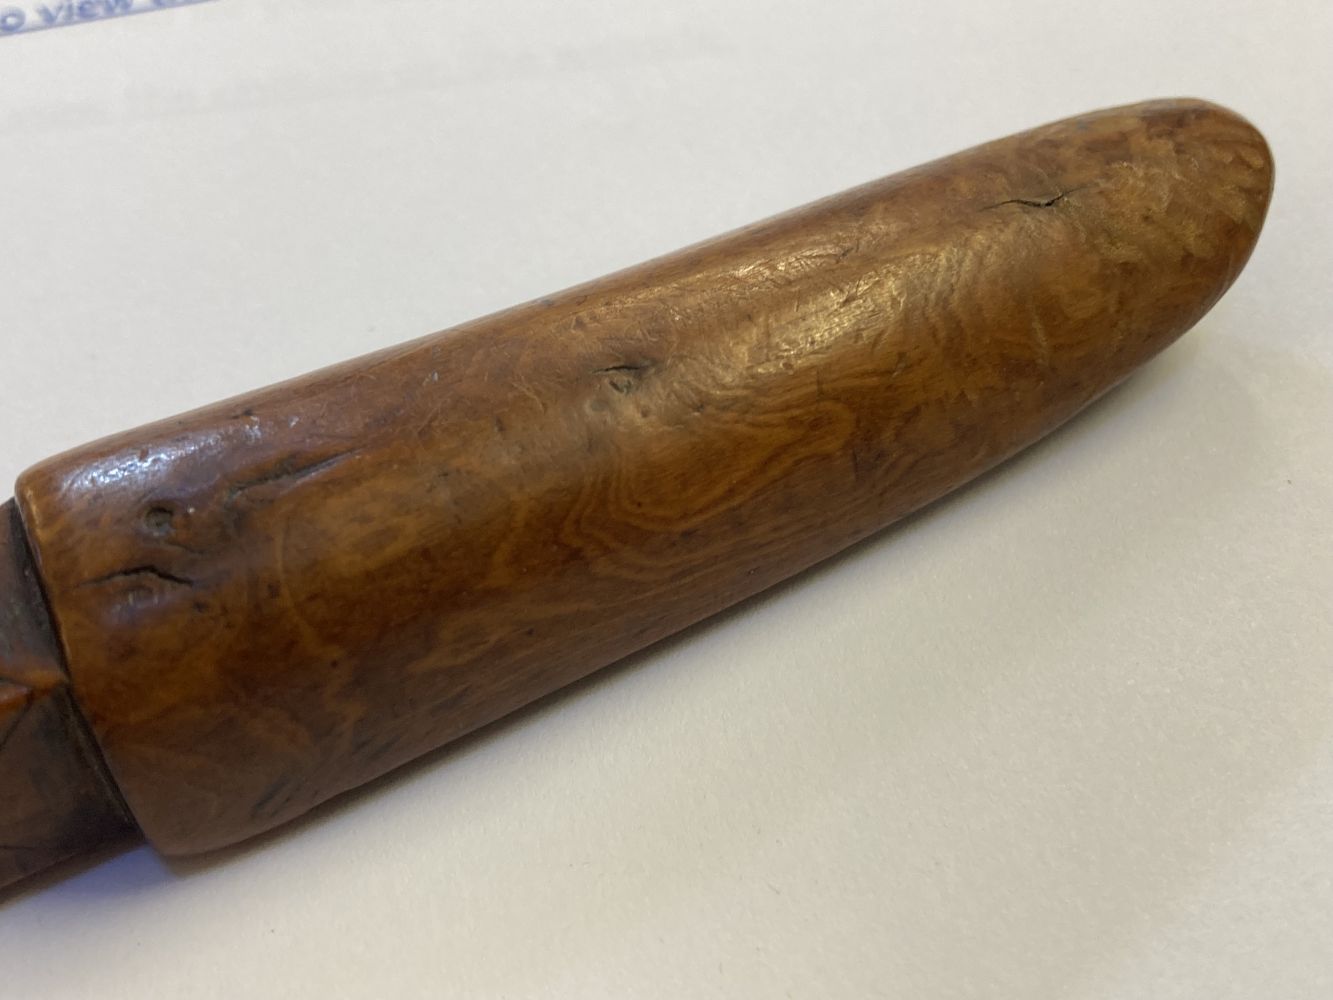 Treen. A 17th century treen apple corer dated 1696 - Image 9 of 10